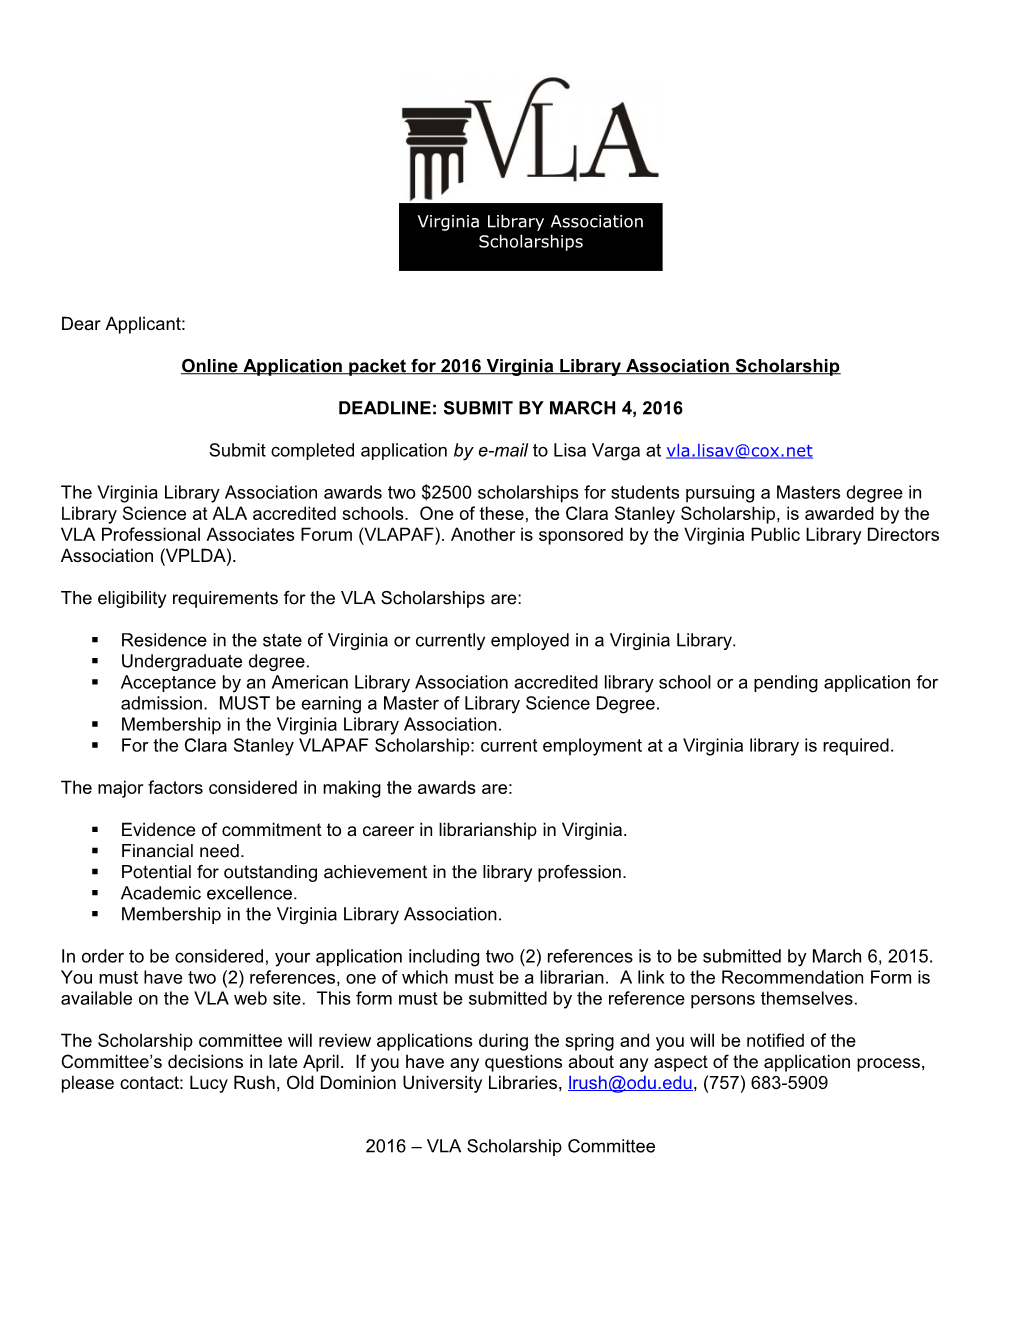 Online Application Packet for 2016 Virginia Library Association Scholarship